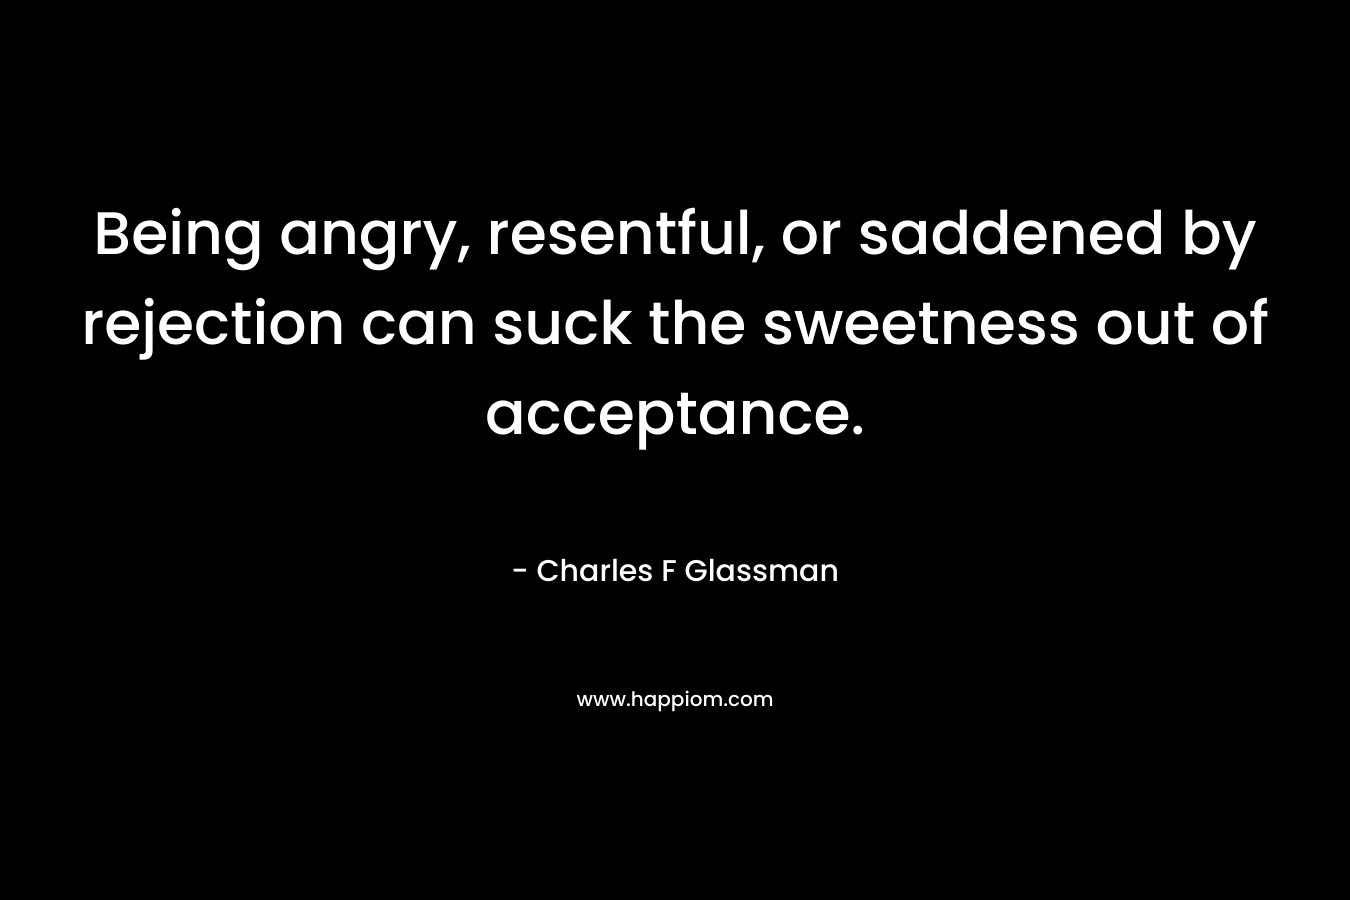 Being angry, resentful, or saddened by rejection can suck the sweetness out of acceptance.